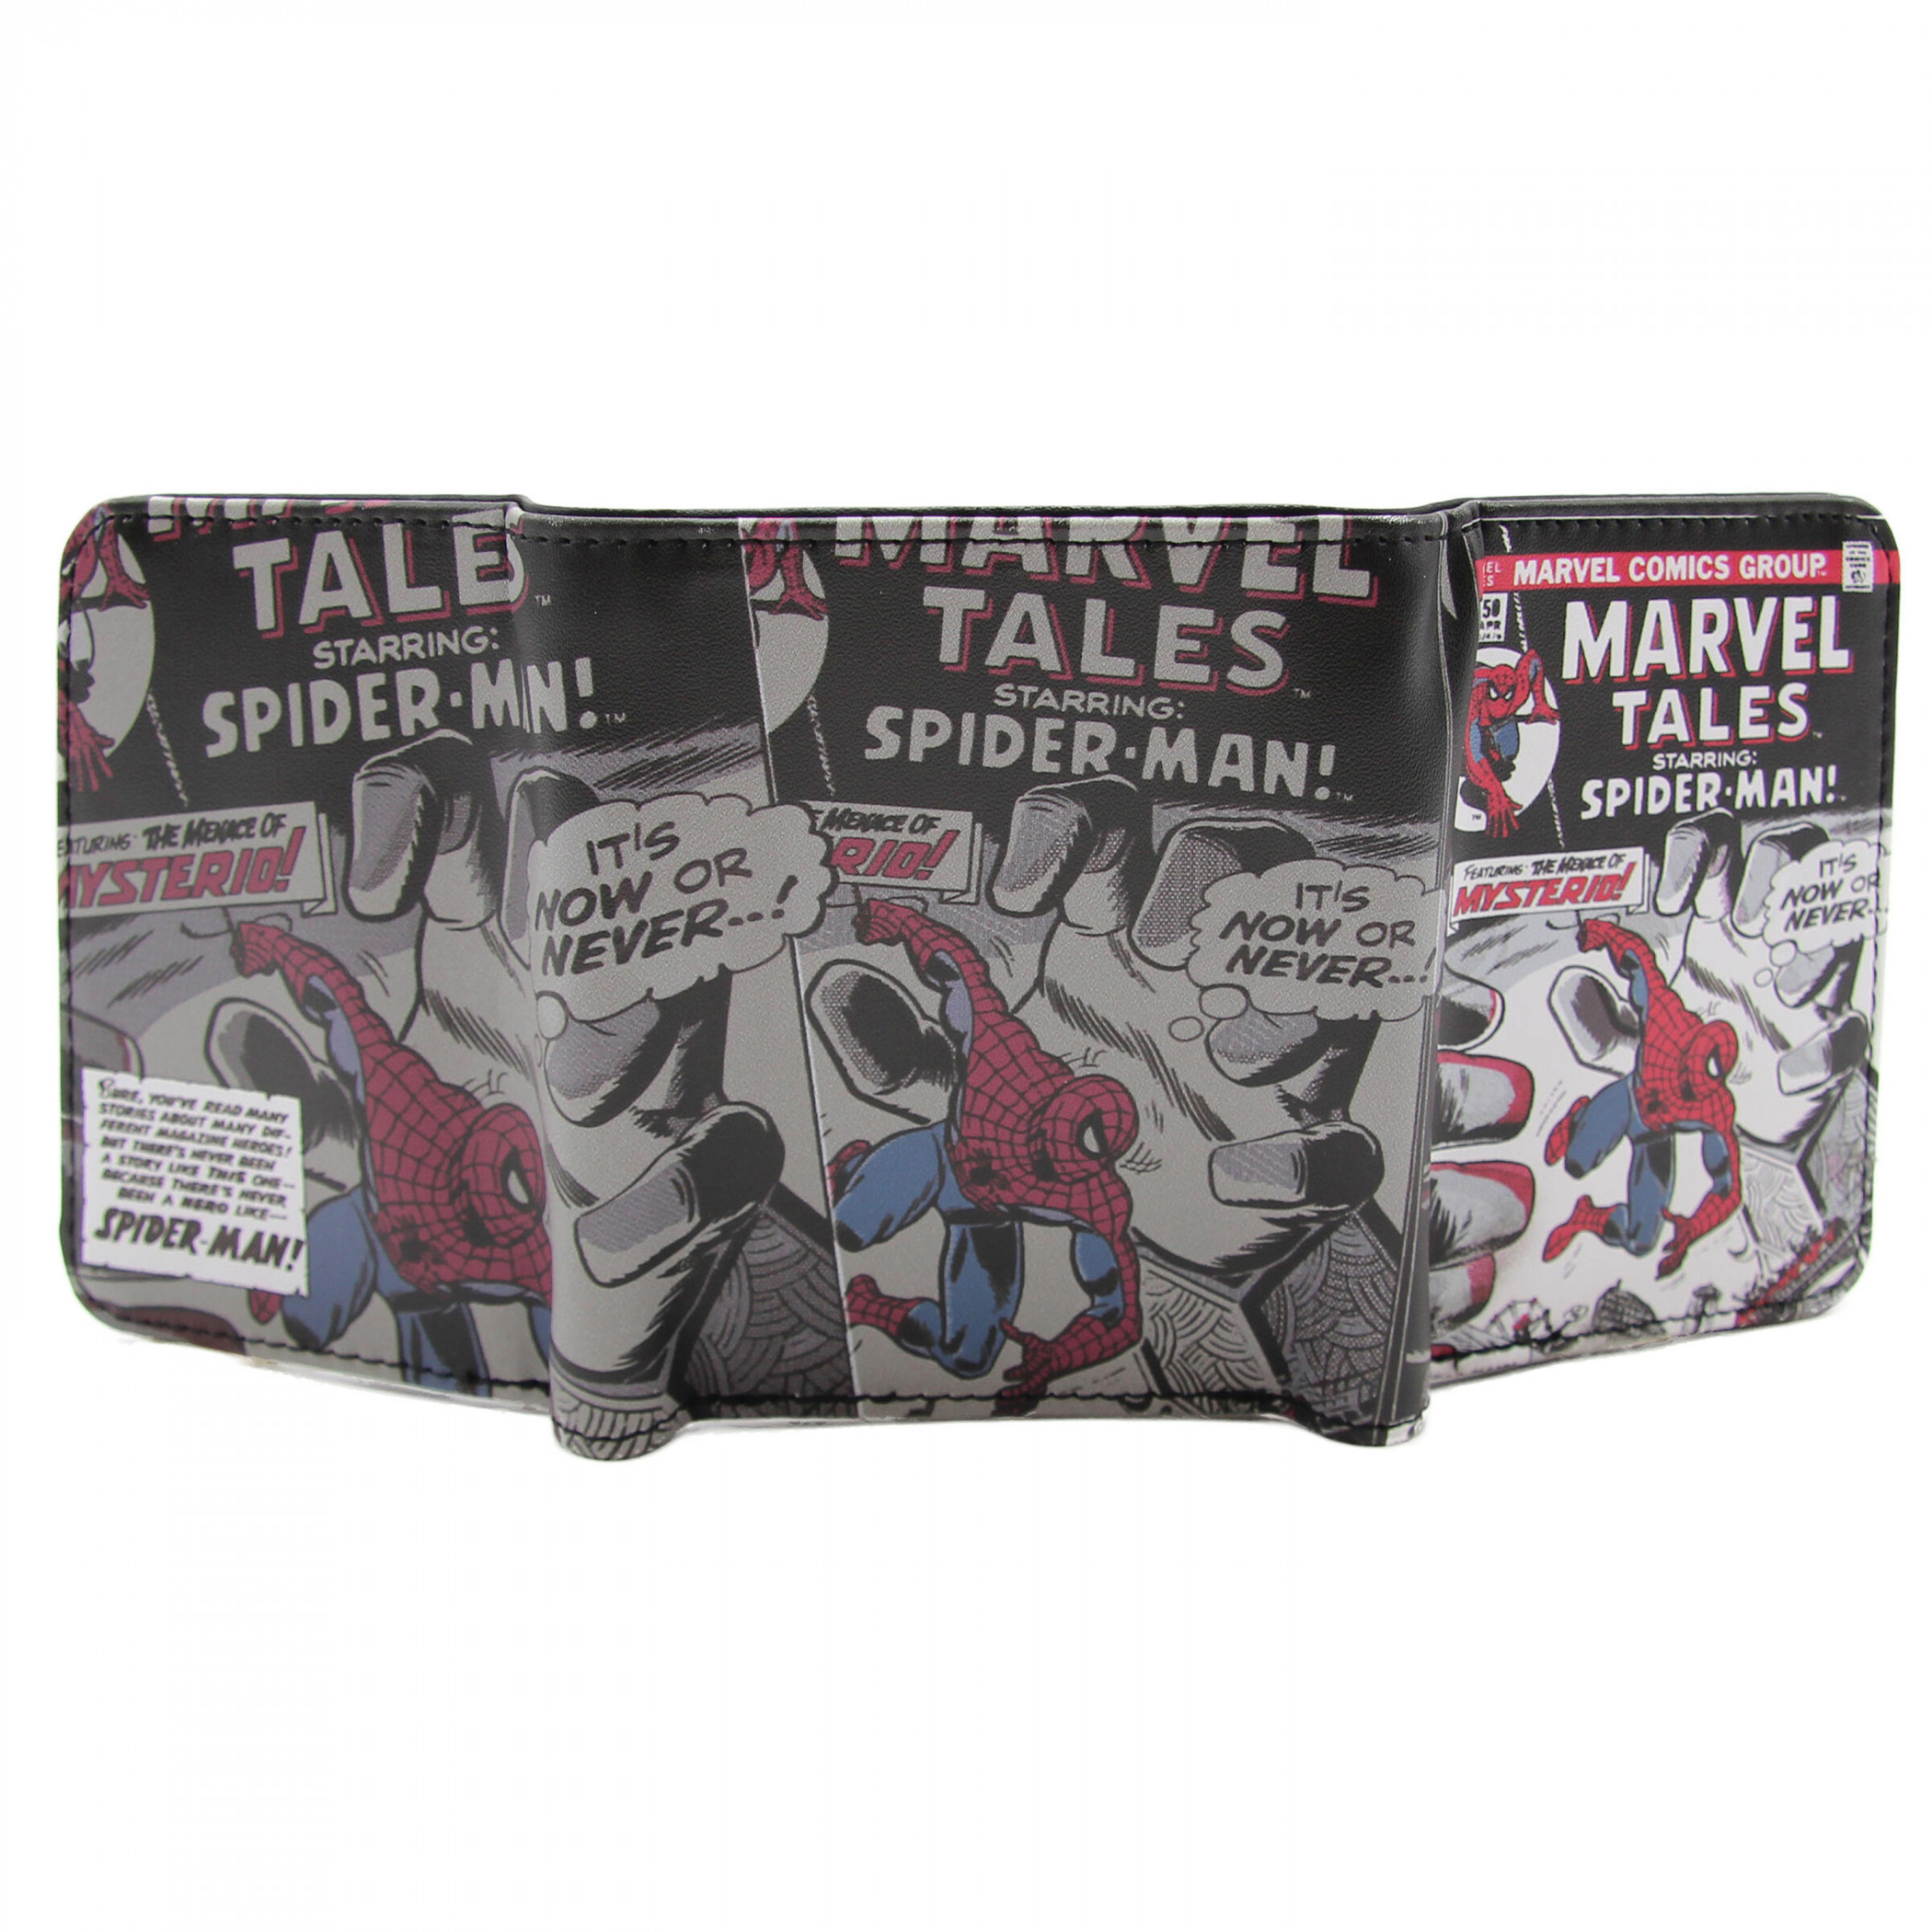 Spider-Man vs Mysterio Trifold Wallet